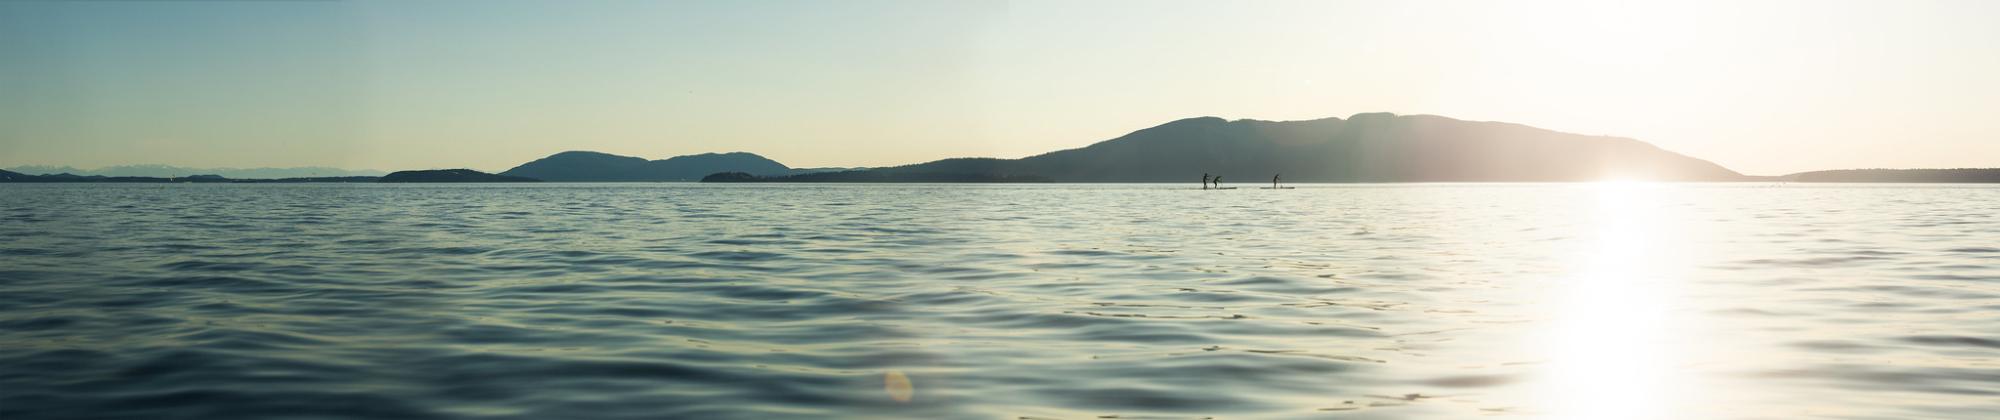 view of Bellingham Bay, Lummi Island, with paddleboarders